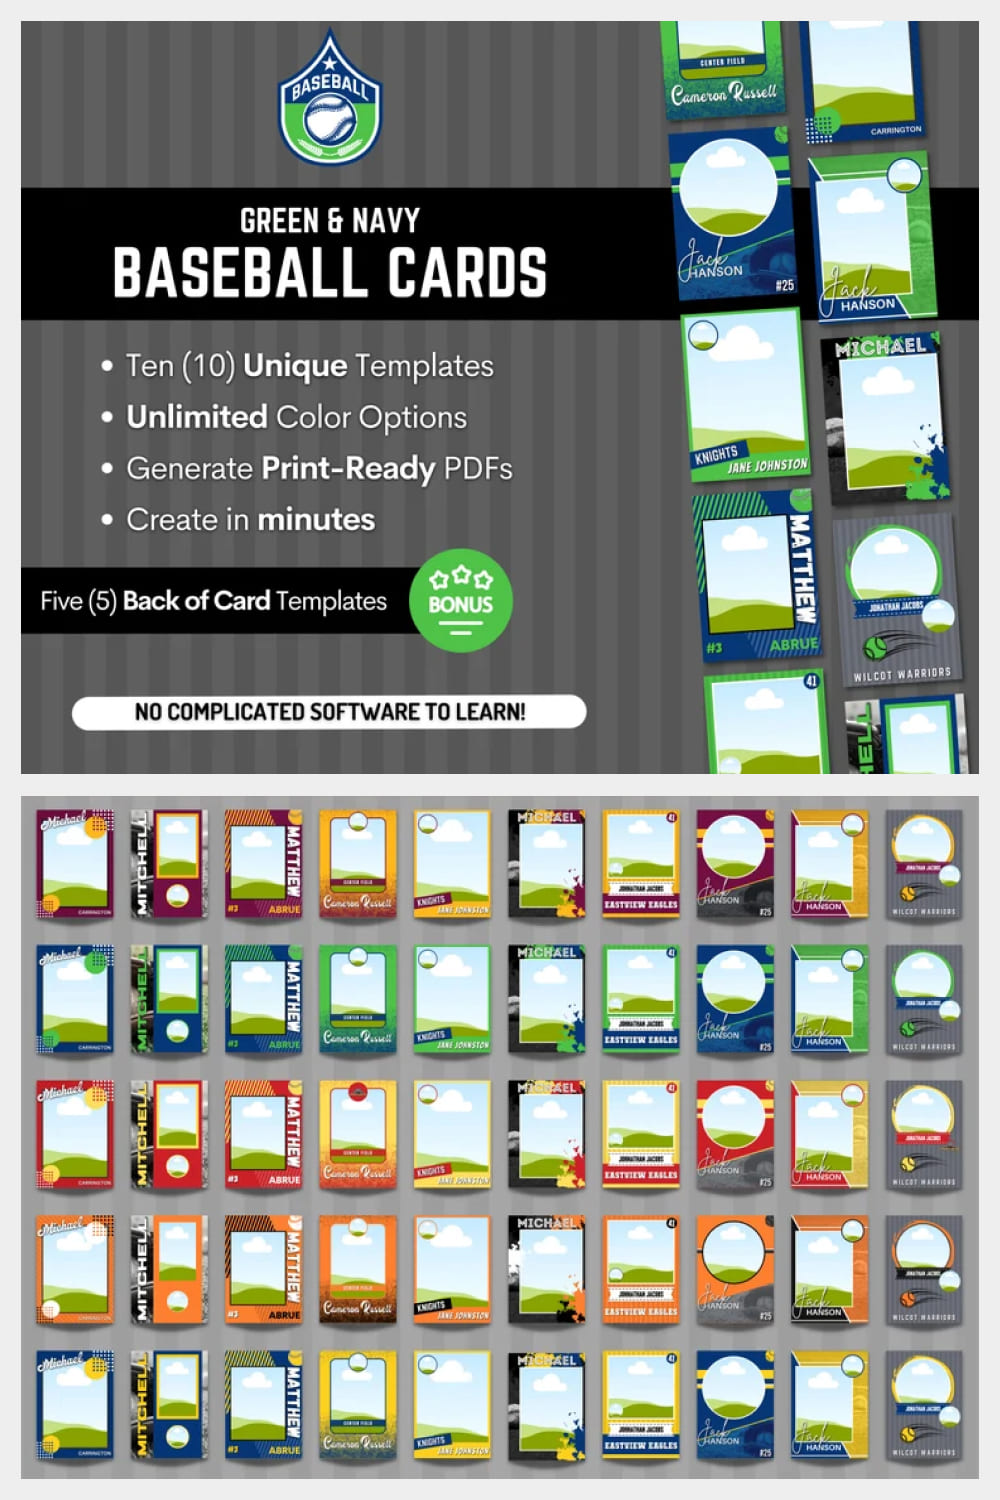 Collage of baseball cards with blue-green background.